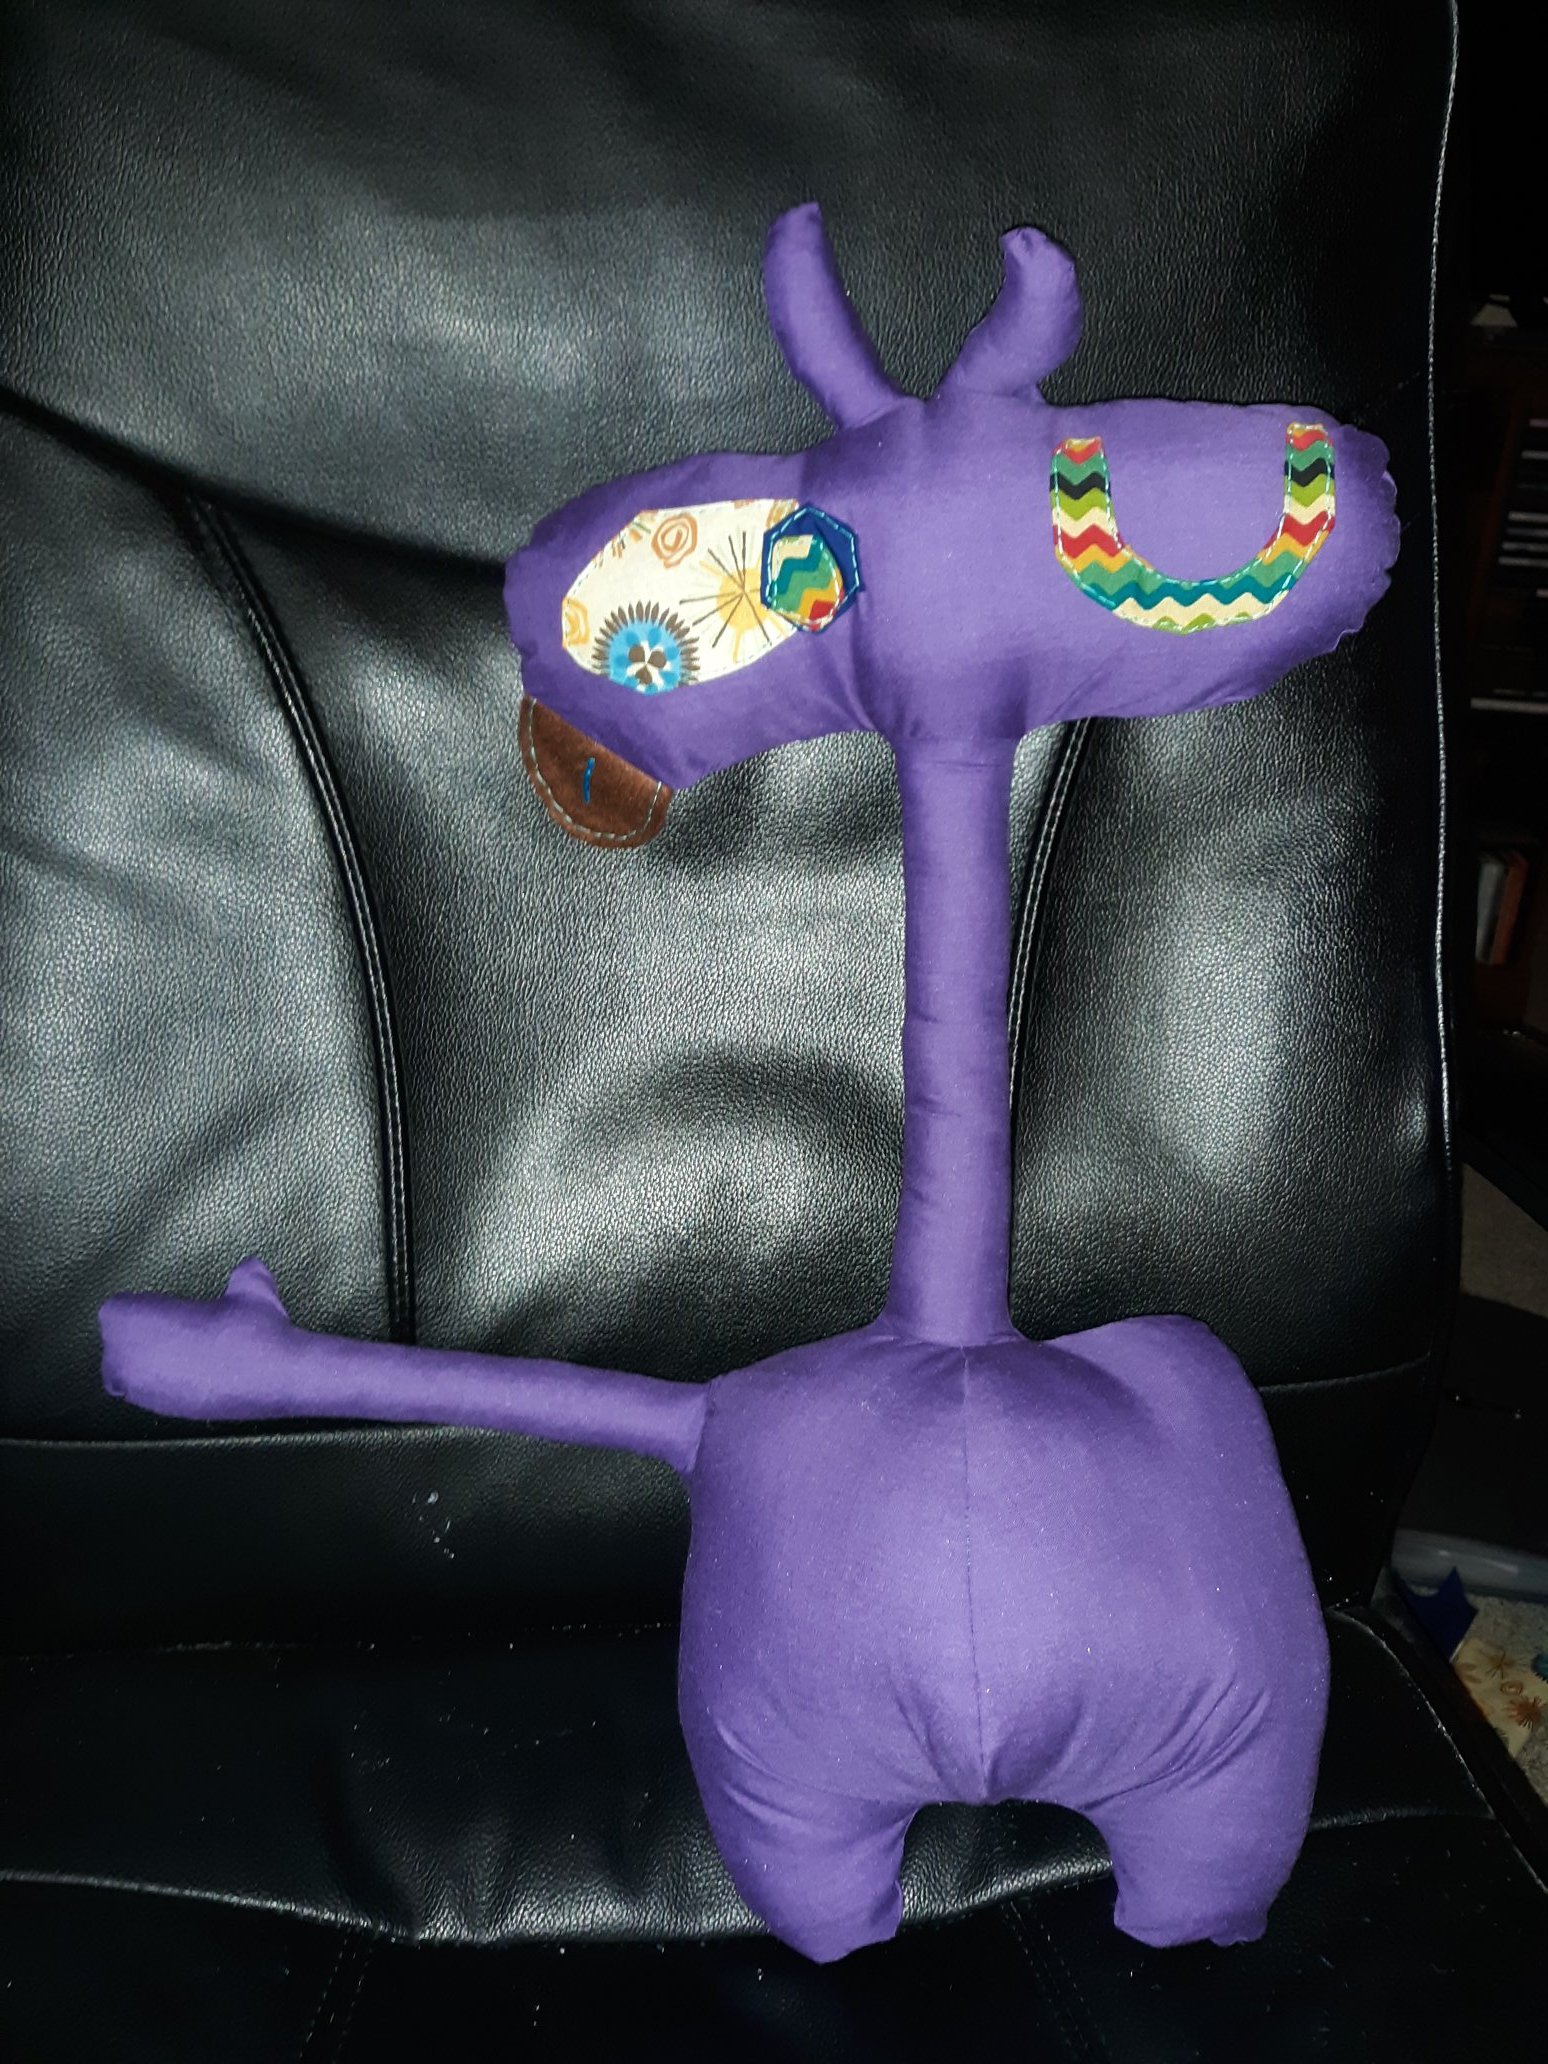 A purple doll with a pill shaped head and a very long thin neck and a round body that has one thin arm sticking out it. The head has two small purple horns coming out of the middle of it. The face is of two eyes with one winking. It has a brown tongue sticking out of the left side of the face. The arm has one hand with the thumb sticking up as if they are asking for a high five from you. They have two stubby feet at the bottom of their body.